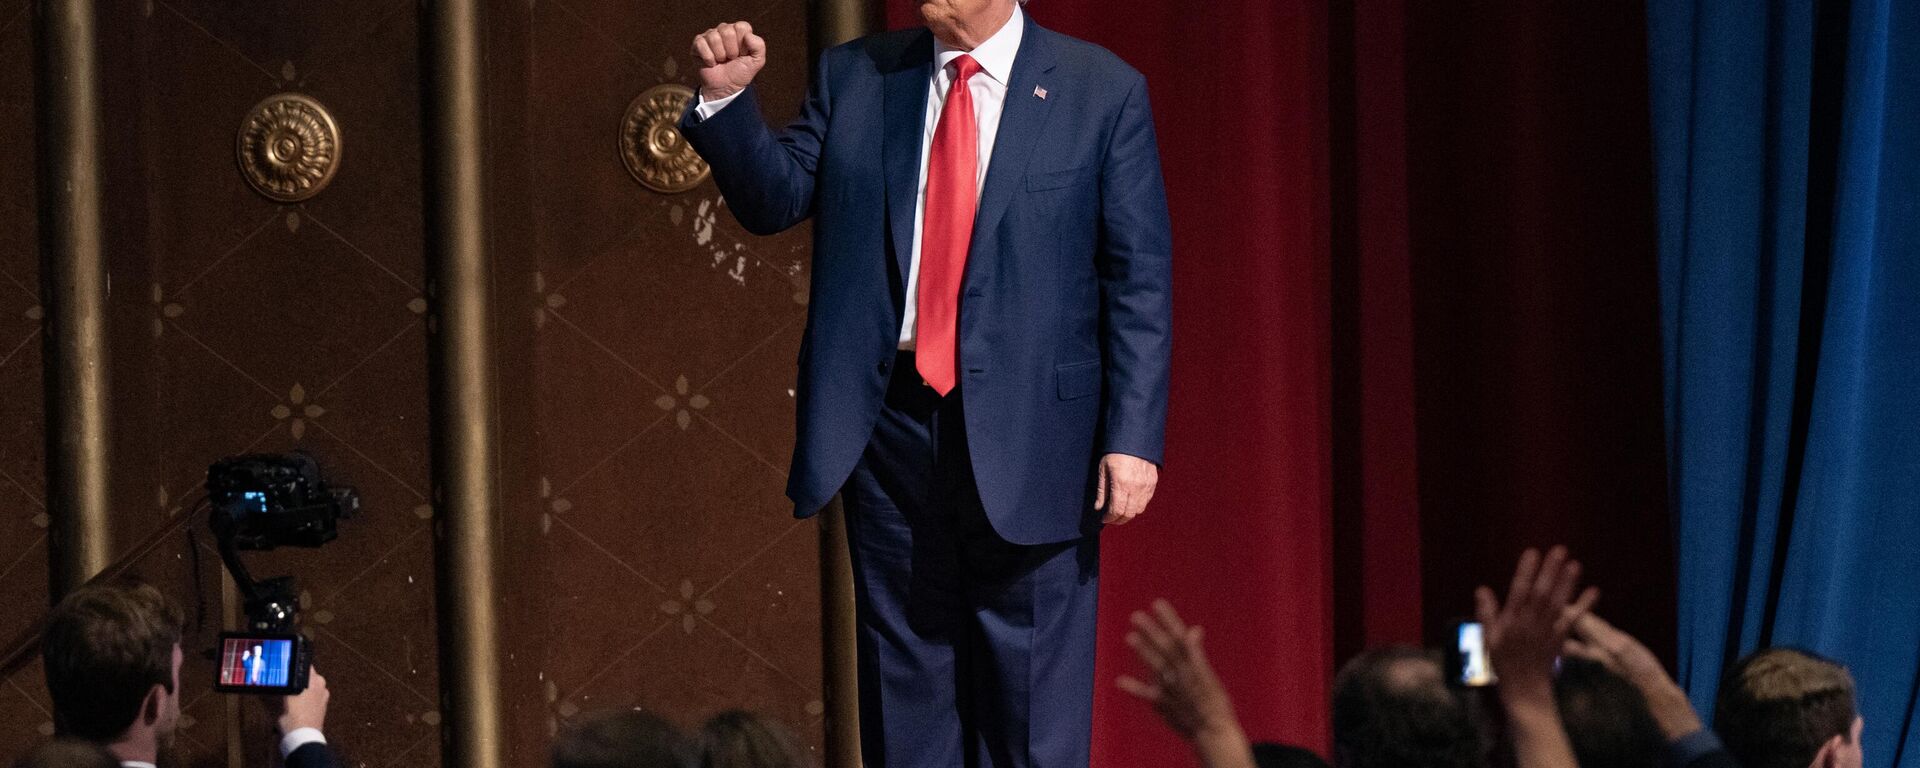 Former US President and 2024 Presidential hopeful Donald Trump gestures as he leaves after speaking at the North Carolina Republican Party Convention in Greensboro, North Carolina, on June 10, 2023 - Sputnik International, 1920, 11.06.2023